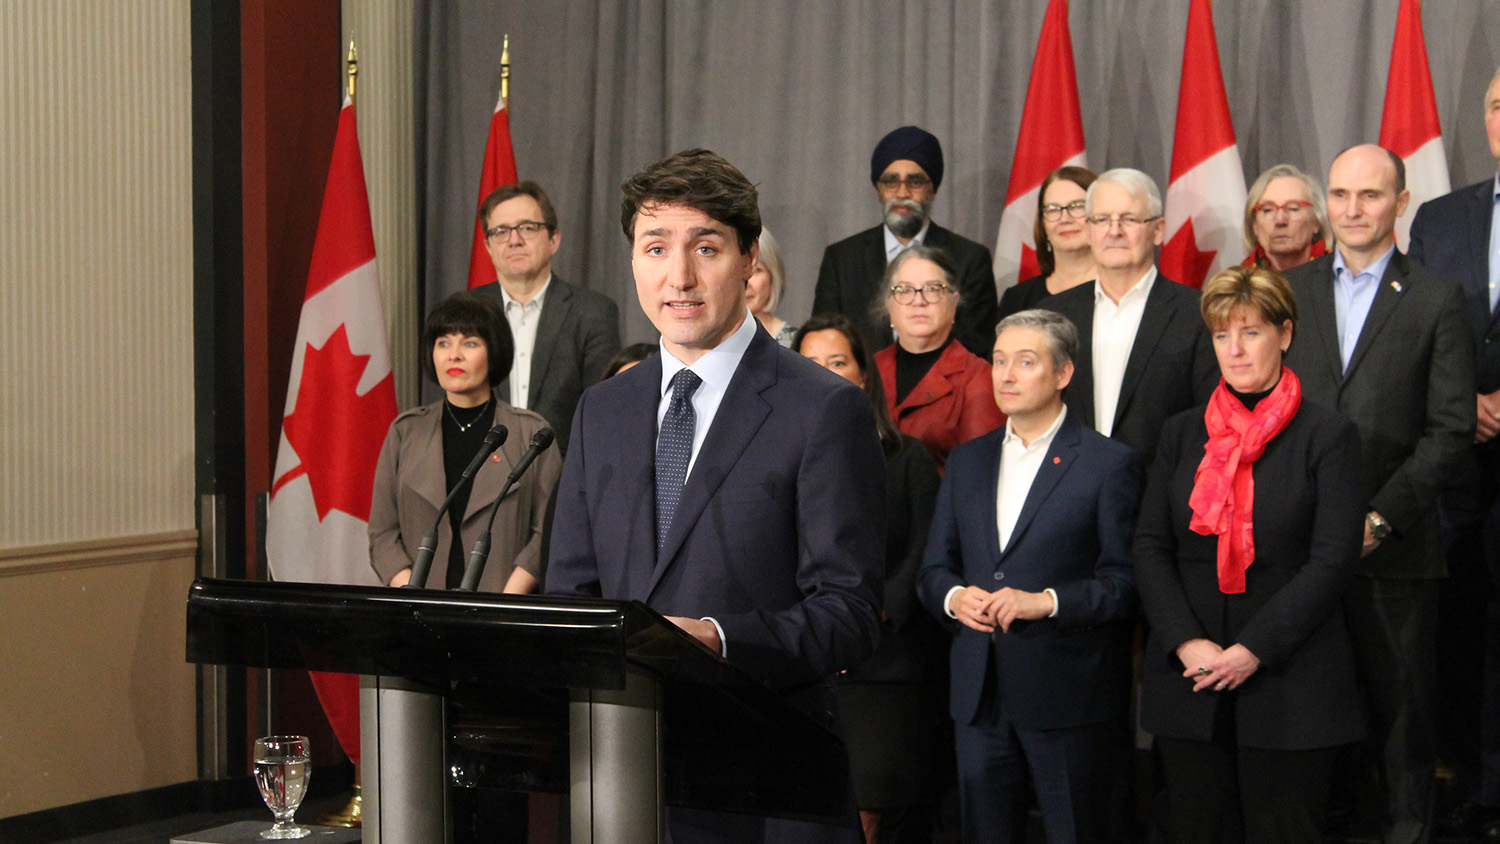 Cabinet ­retreat closes with remarks from Trudeau